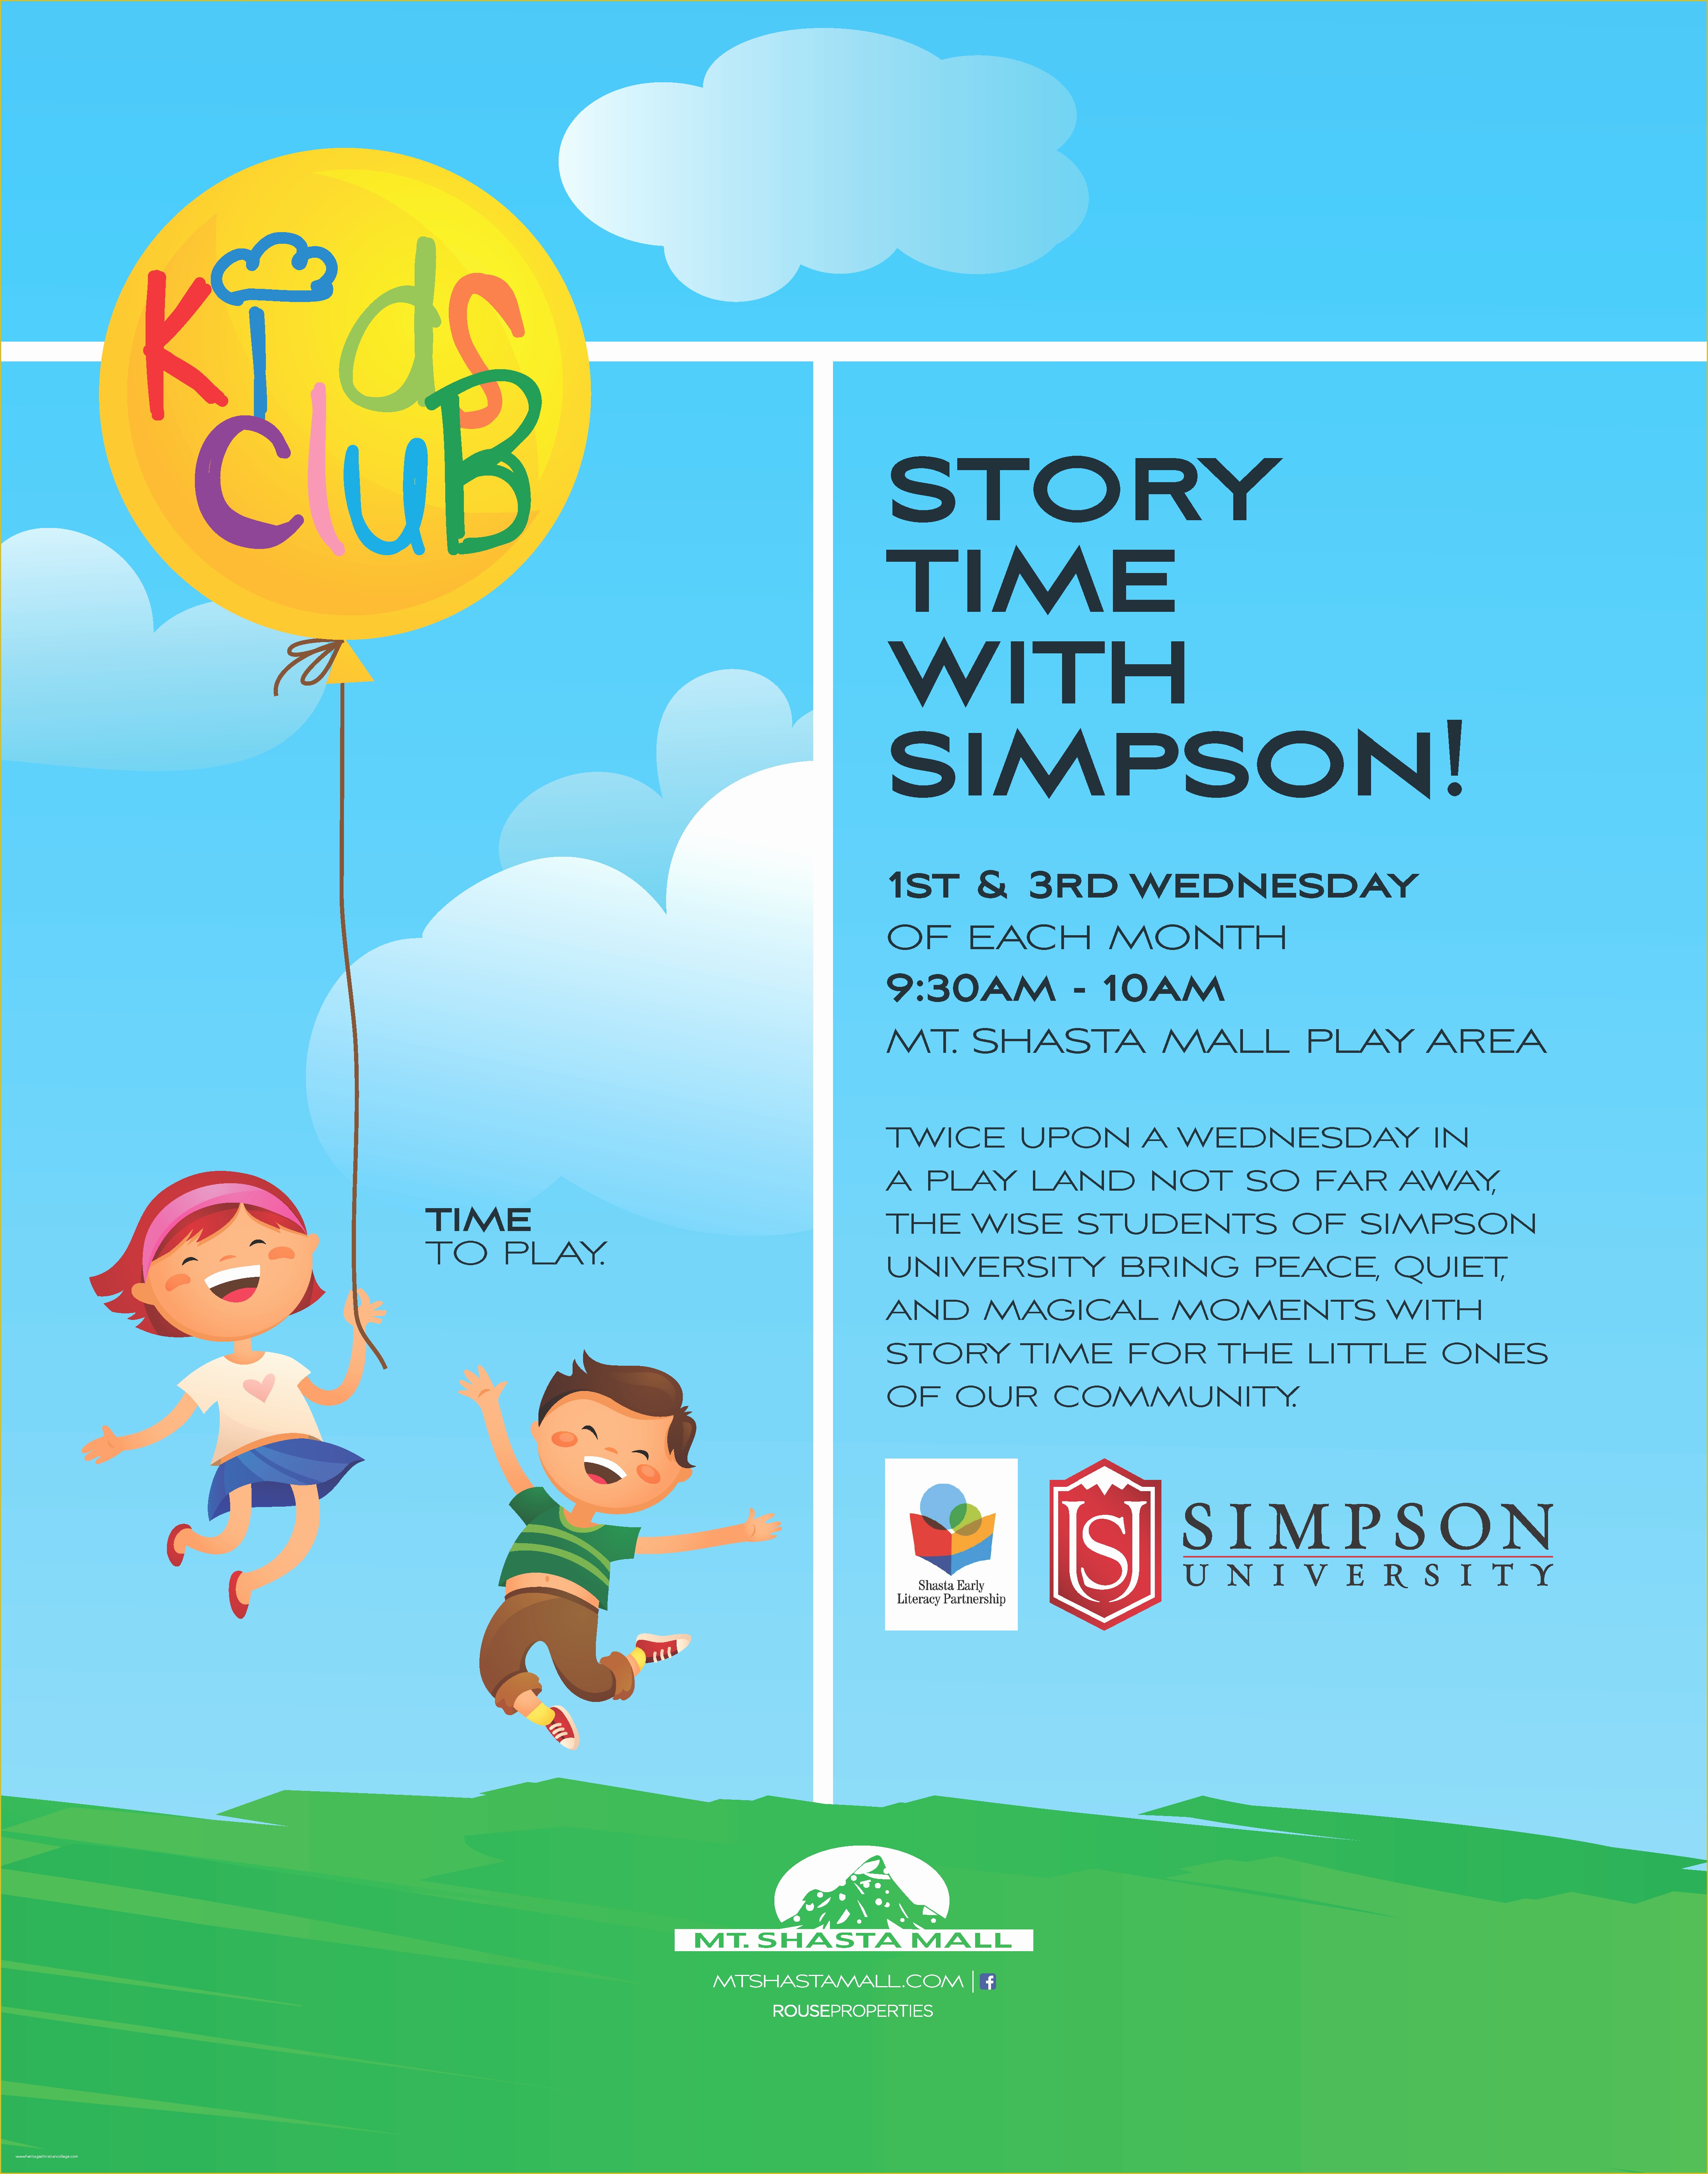 Free Child Care Powerpoint Templates Of Kids Club Story Time with Simpson Flyer with Logos First